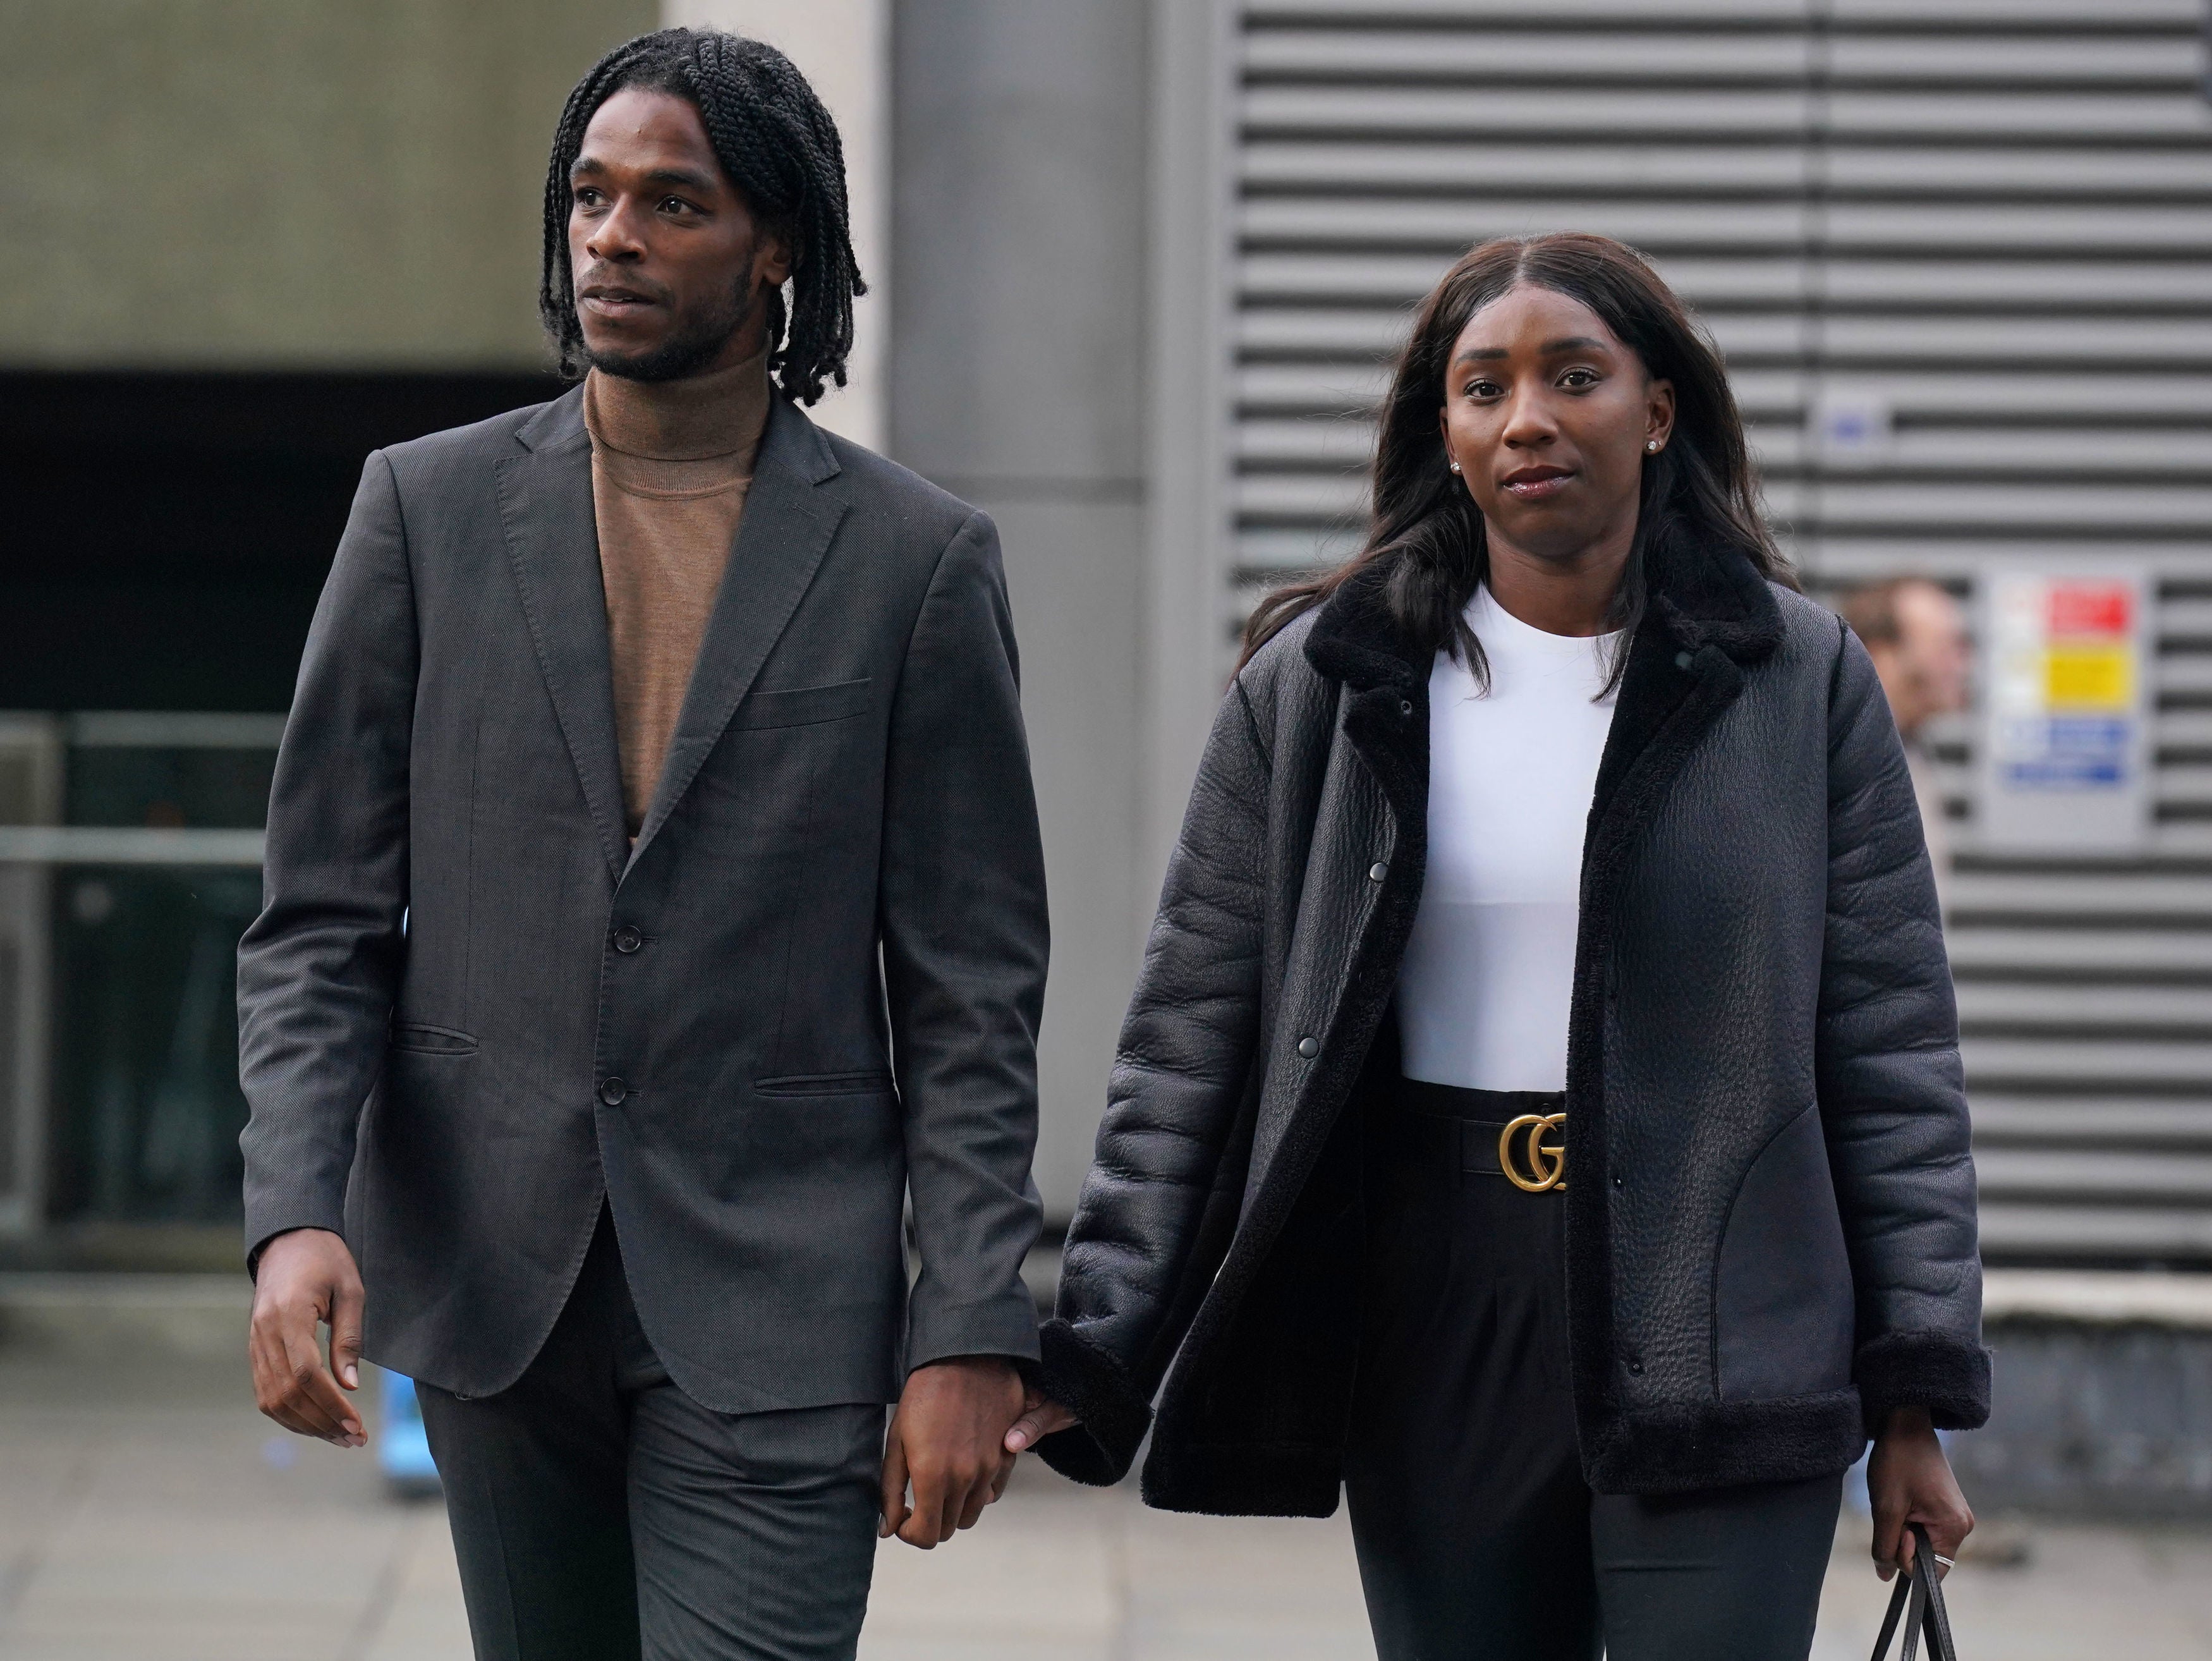 The couple complained they were racially profiled during the stop and search